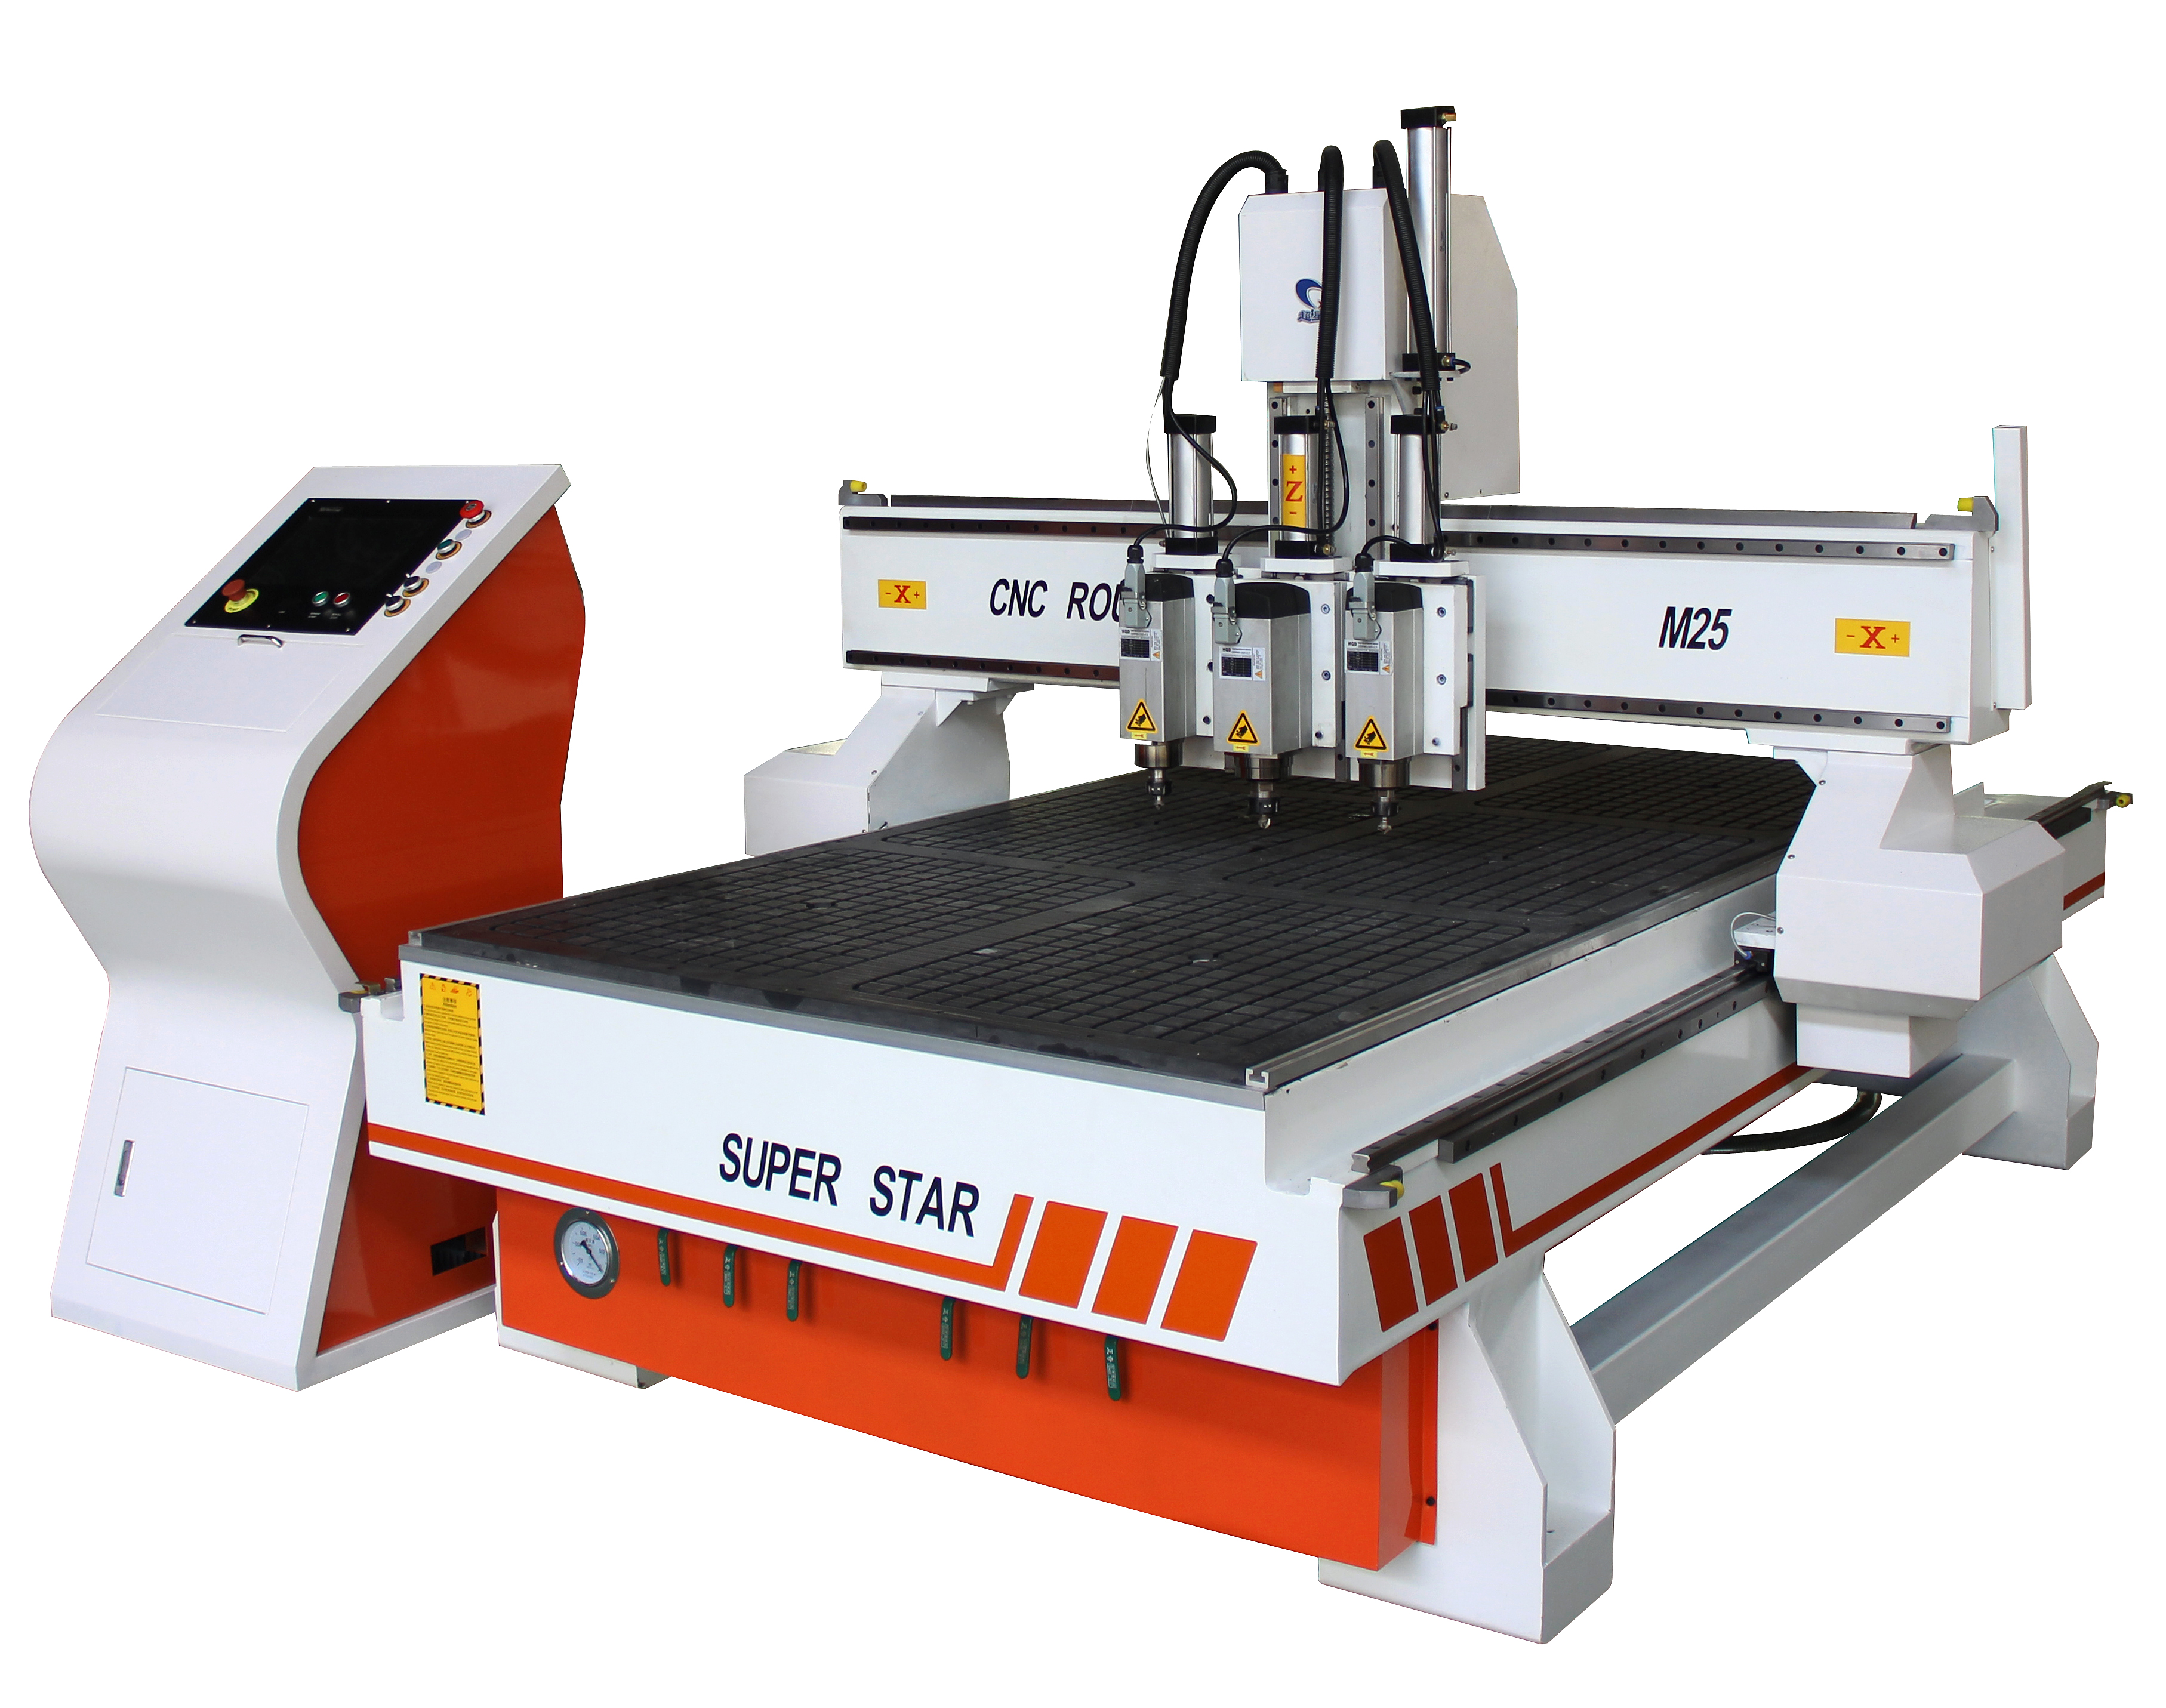 Engraving machine applicable industry scope